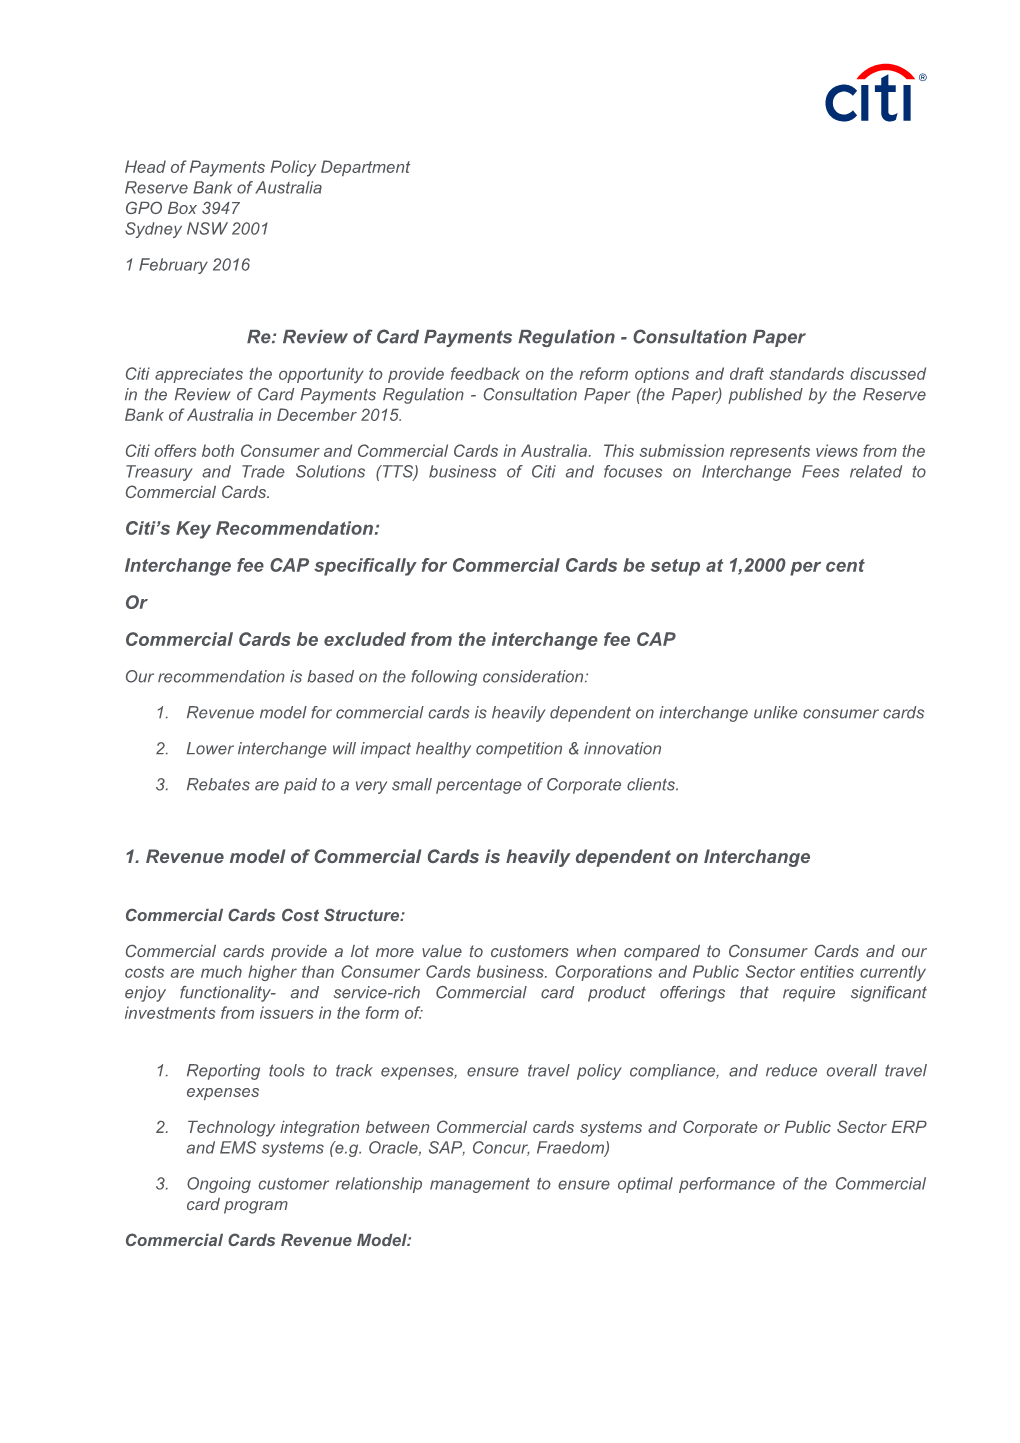 Re: Review of Card Payments Regulation - Consultationpaper